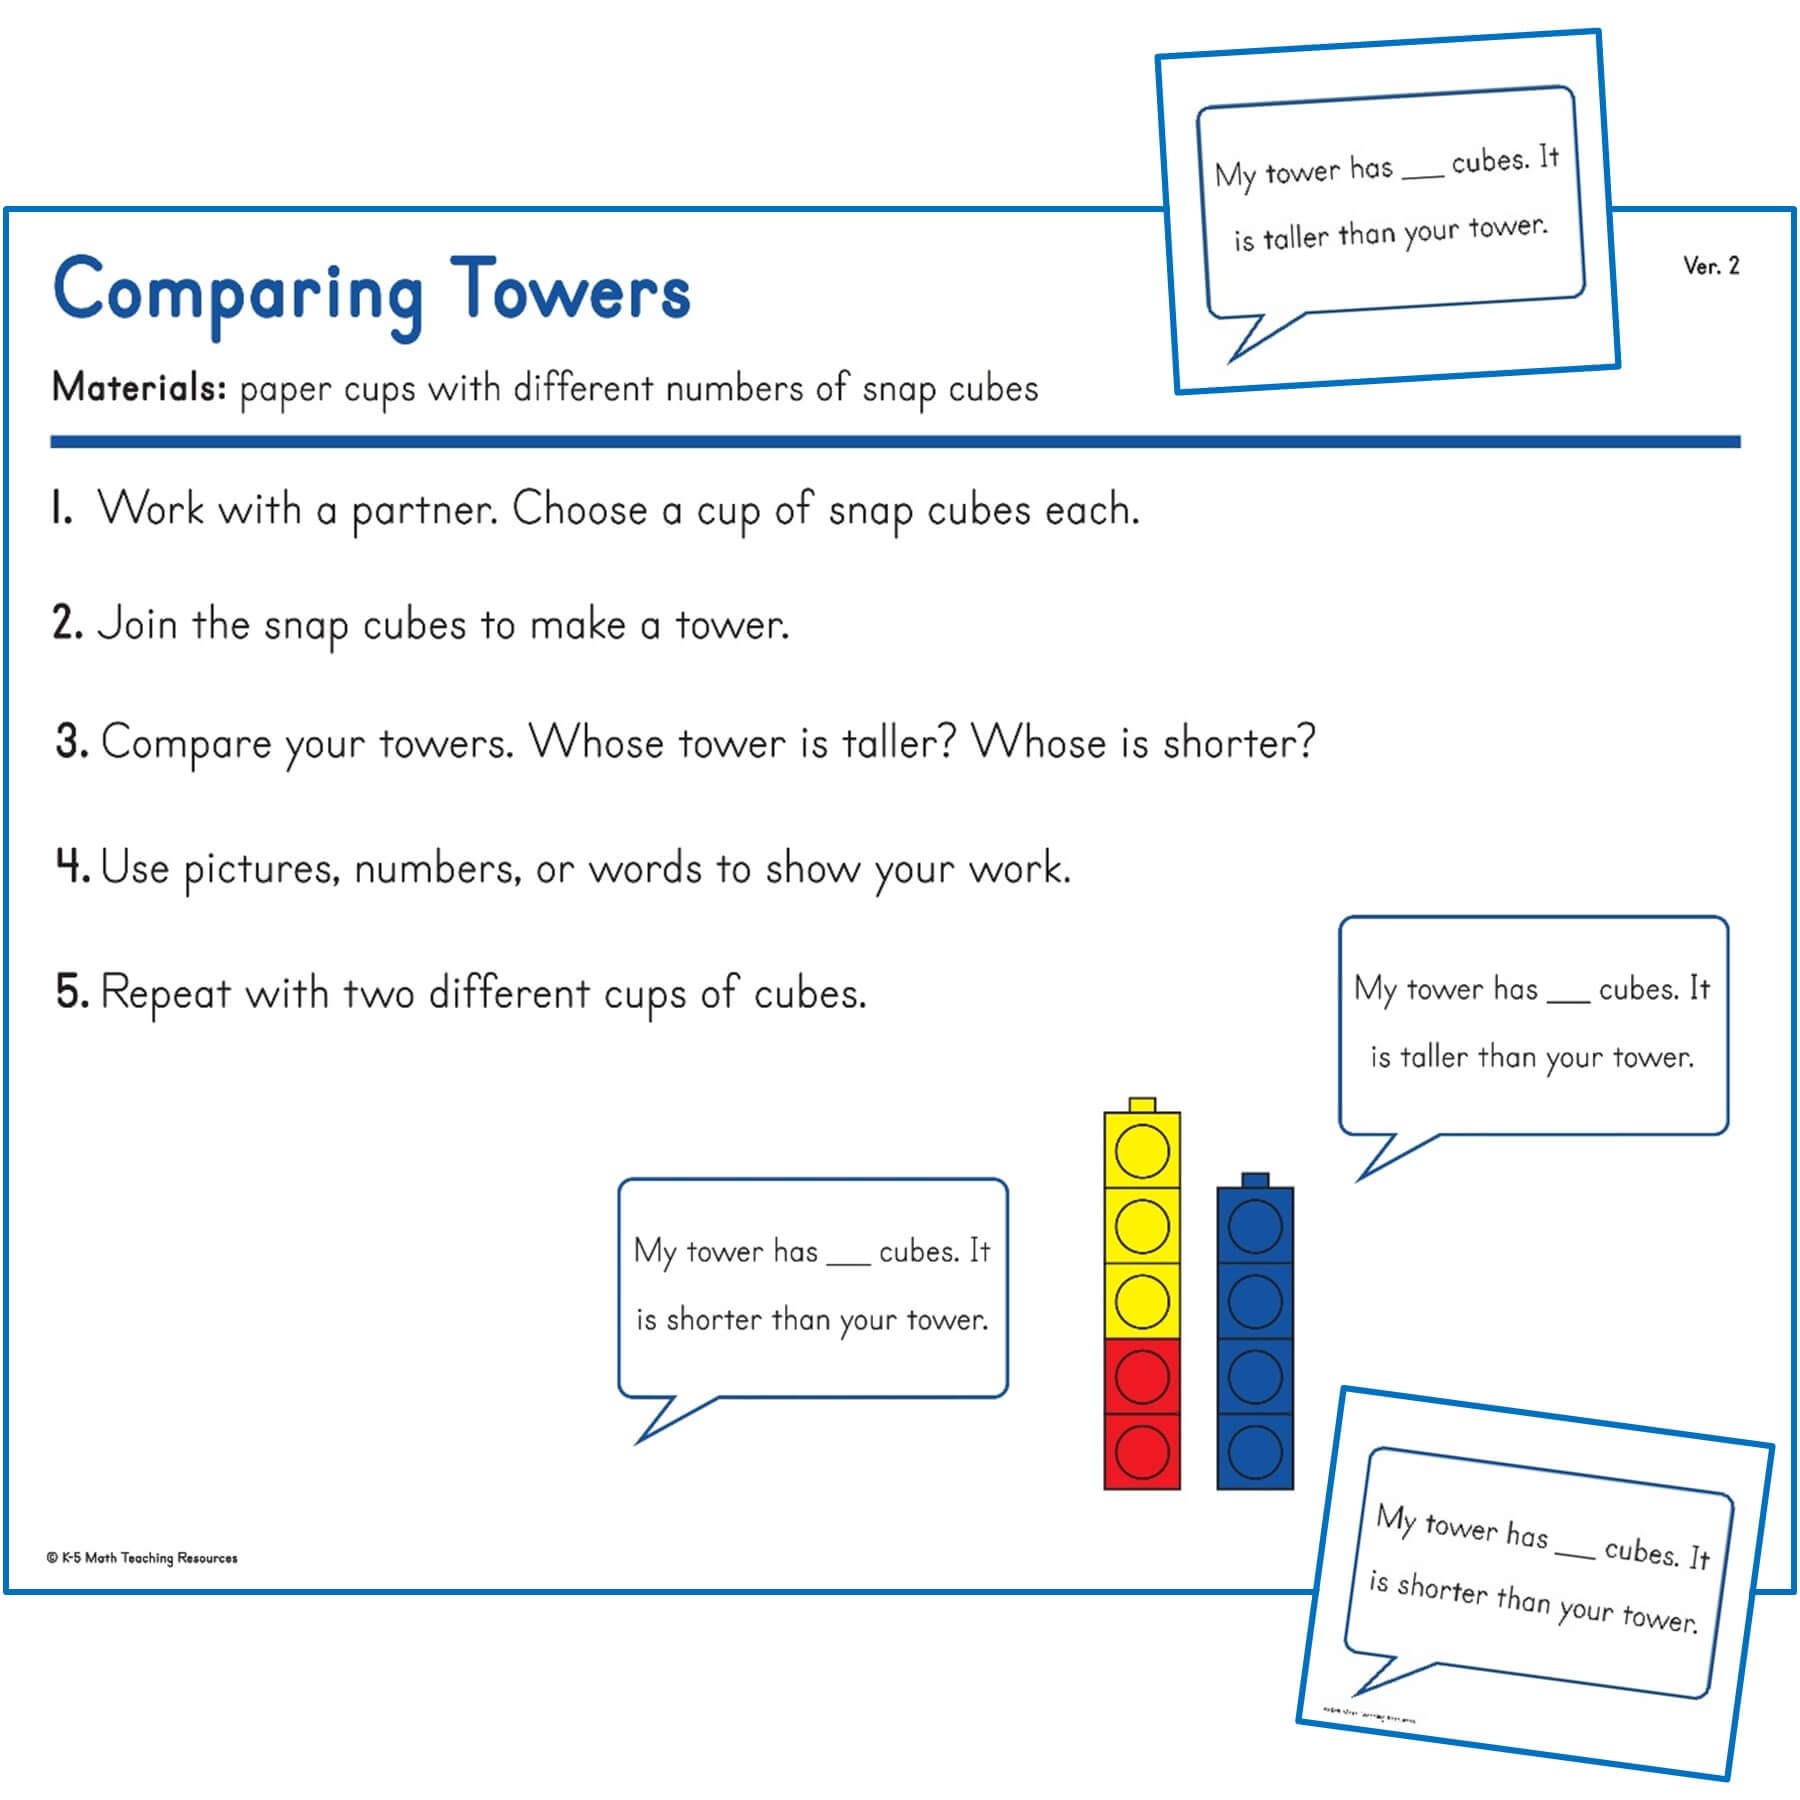 Comparing Towers